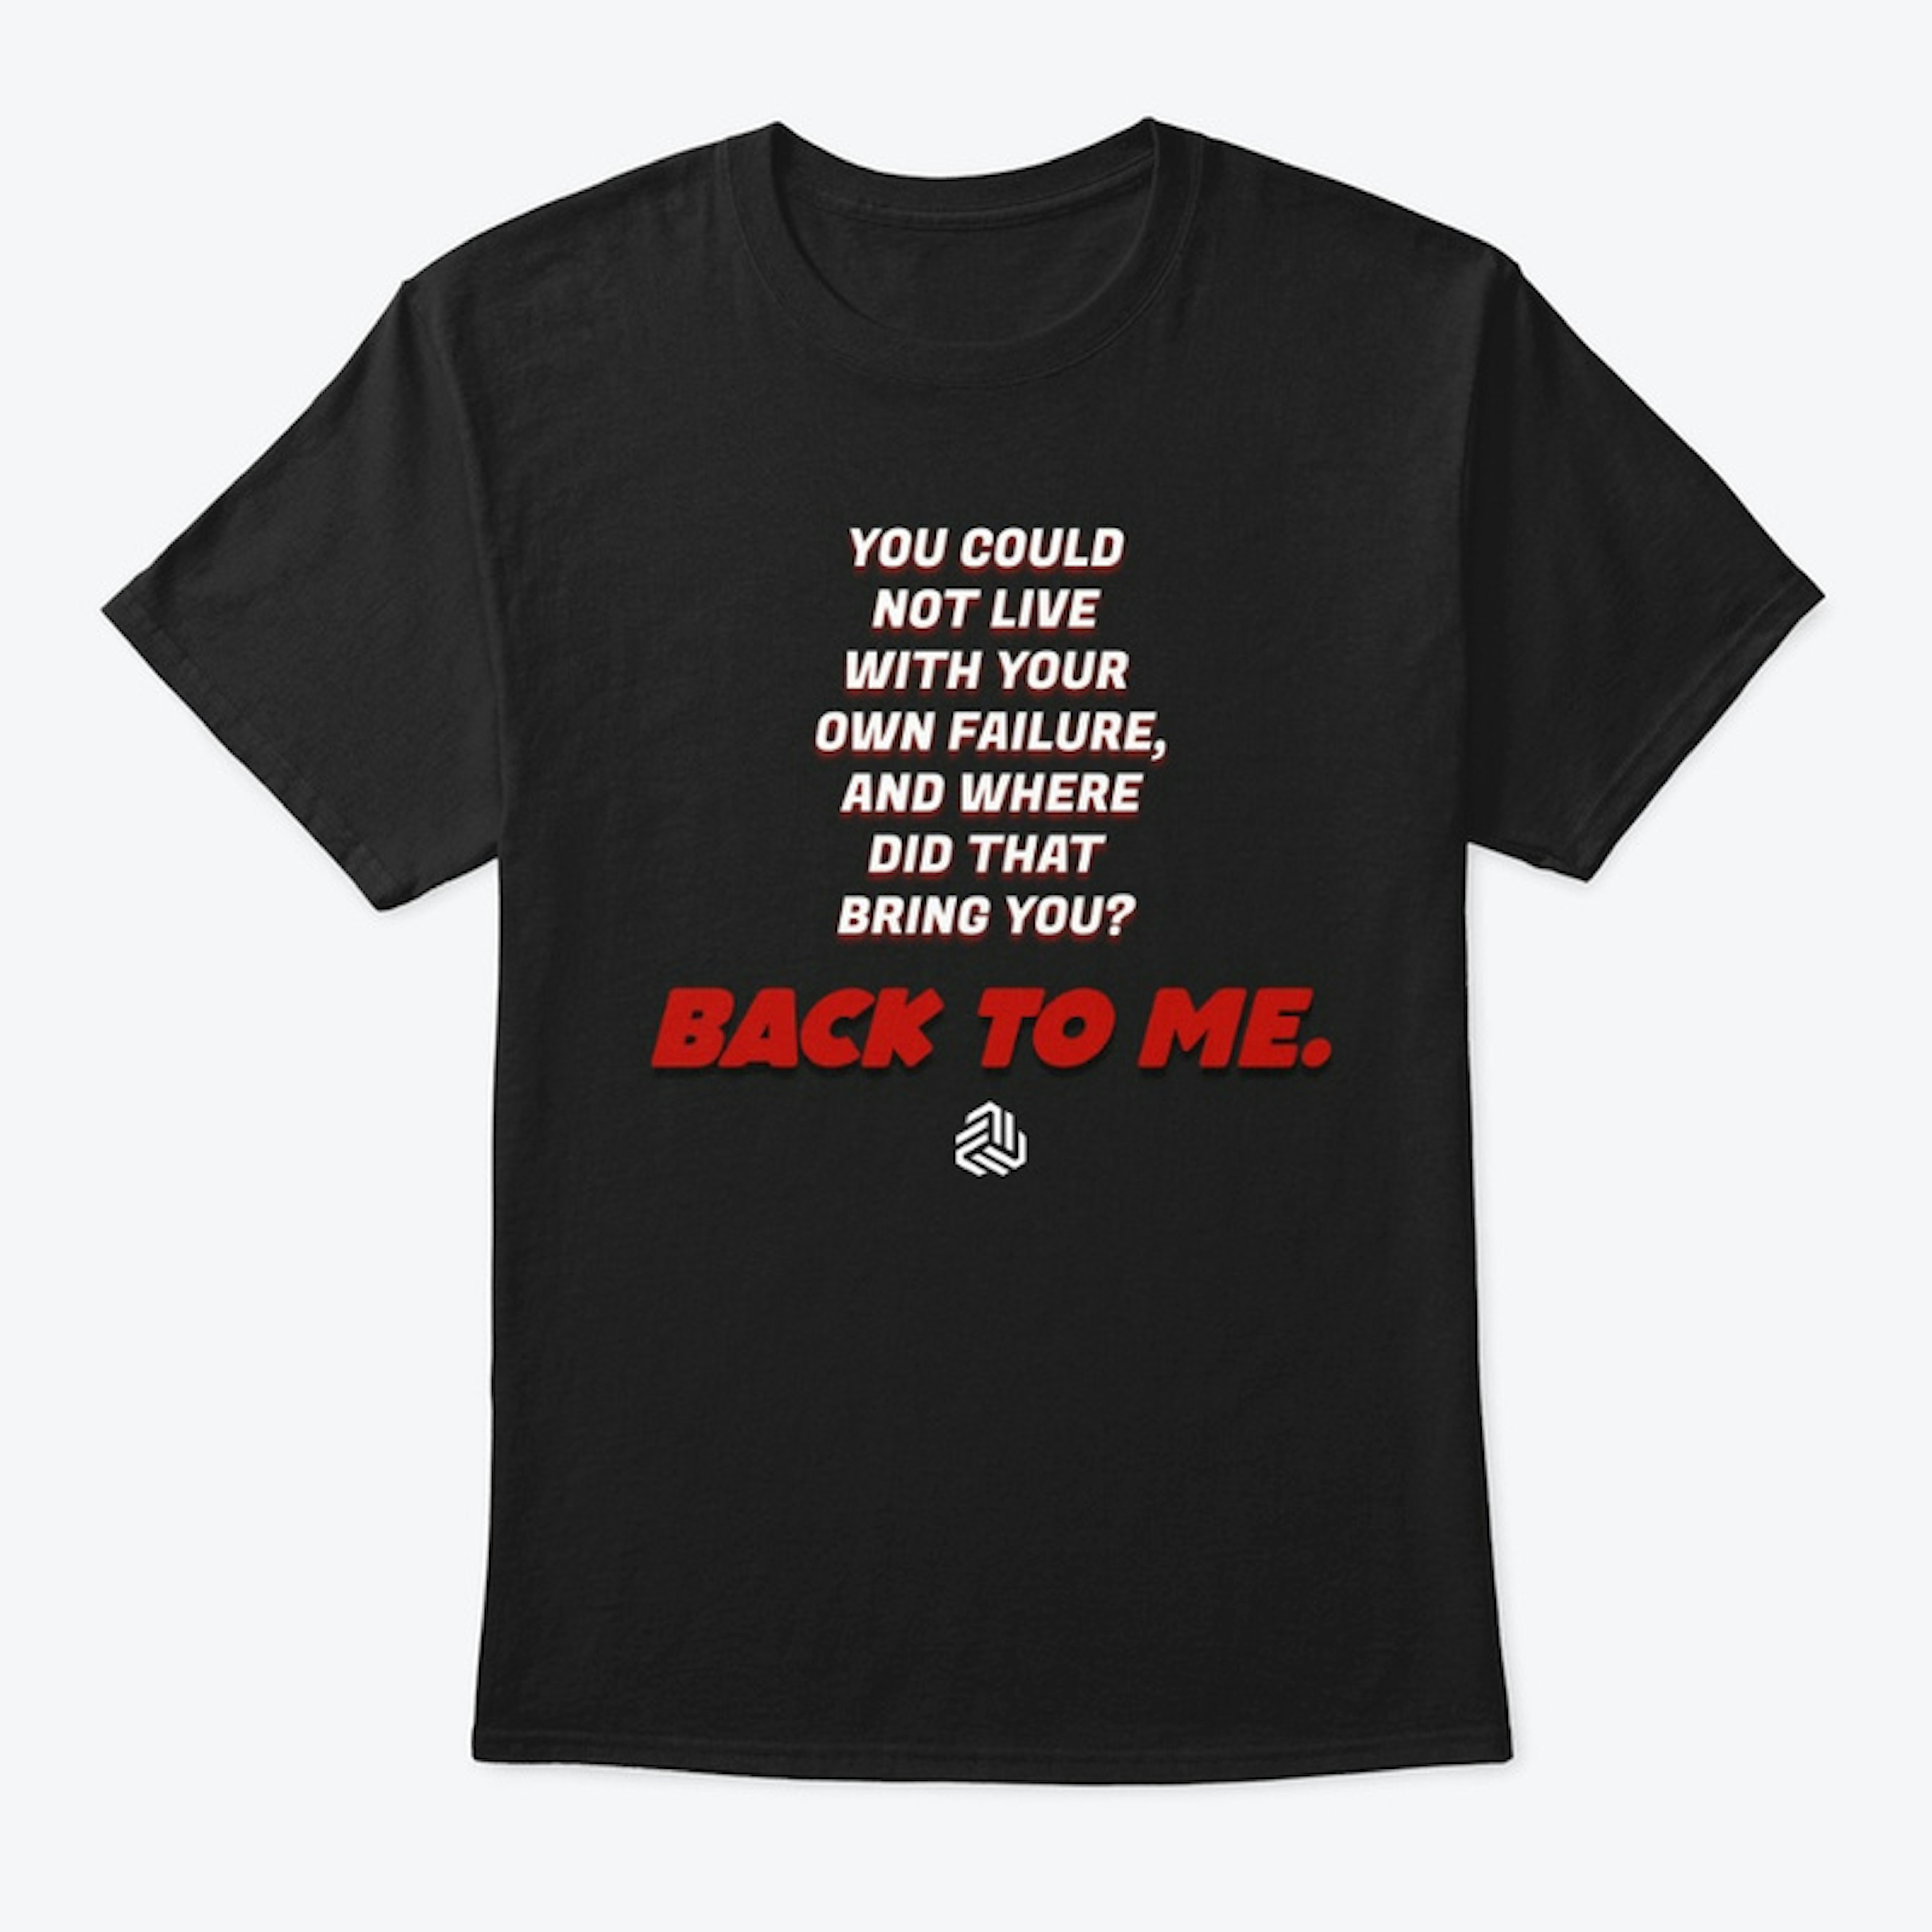 BACK TO ME: LIMITED EDITION